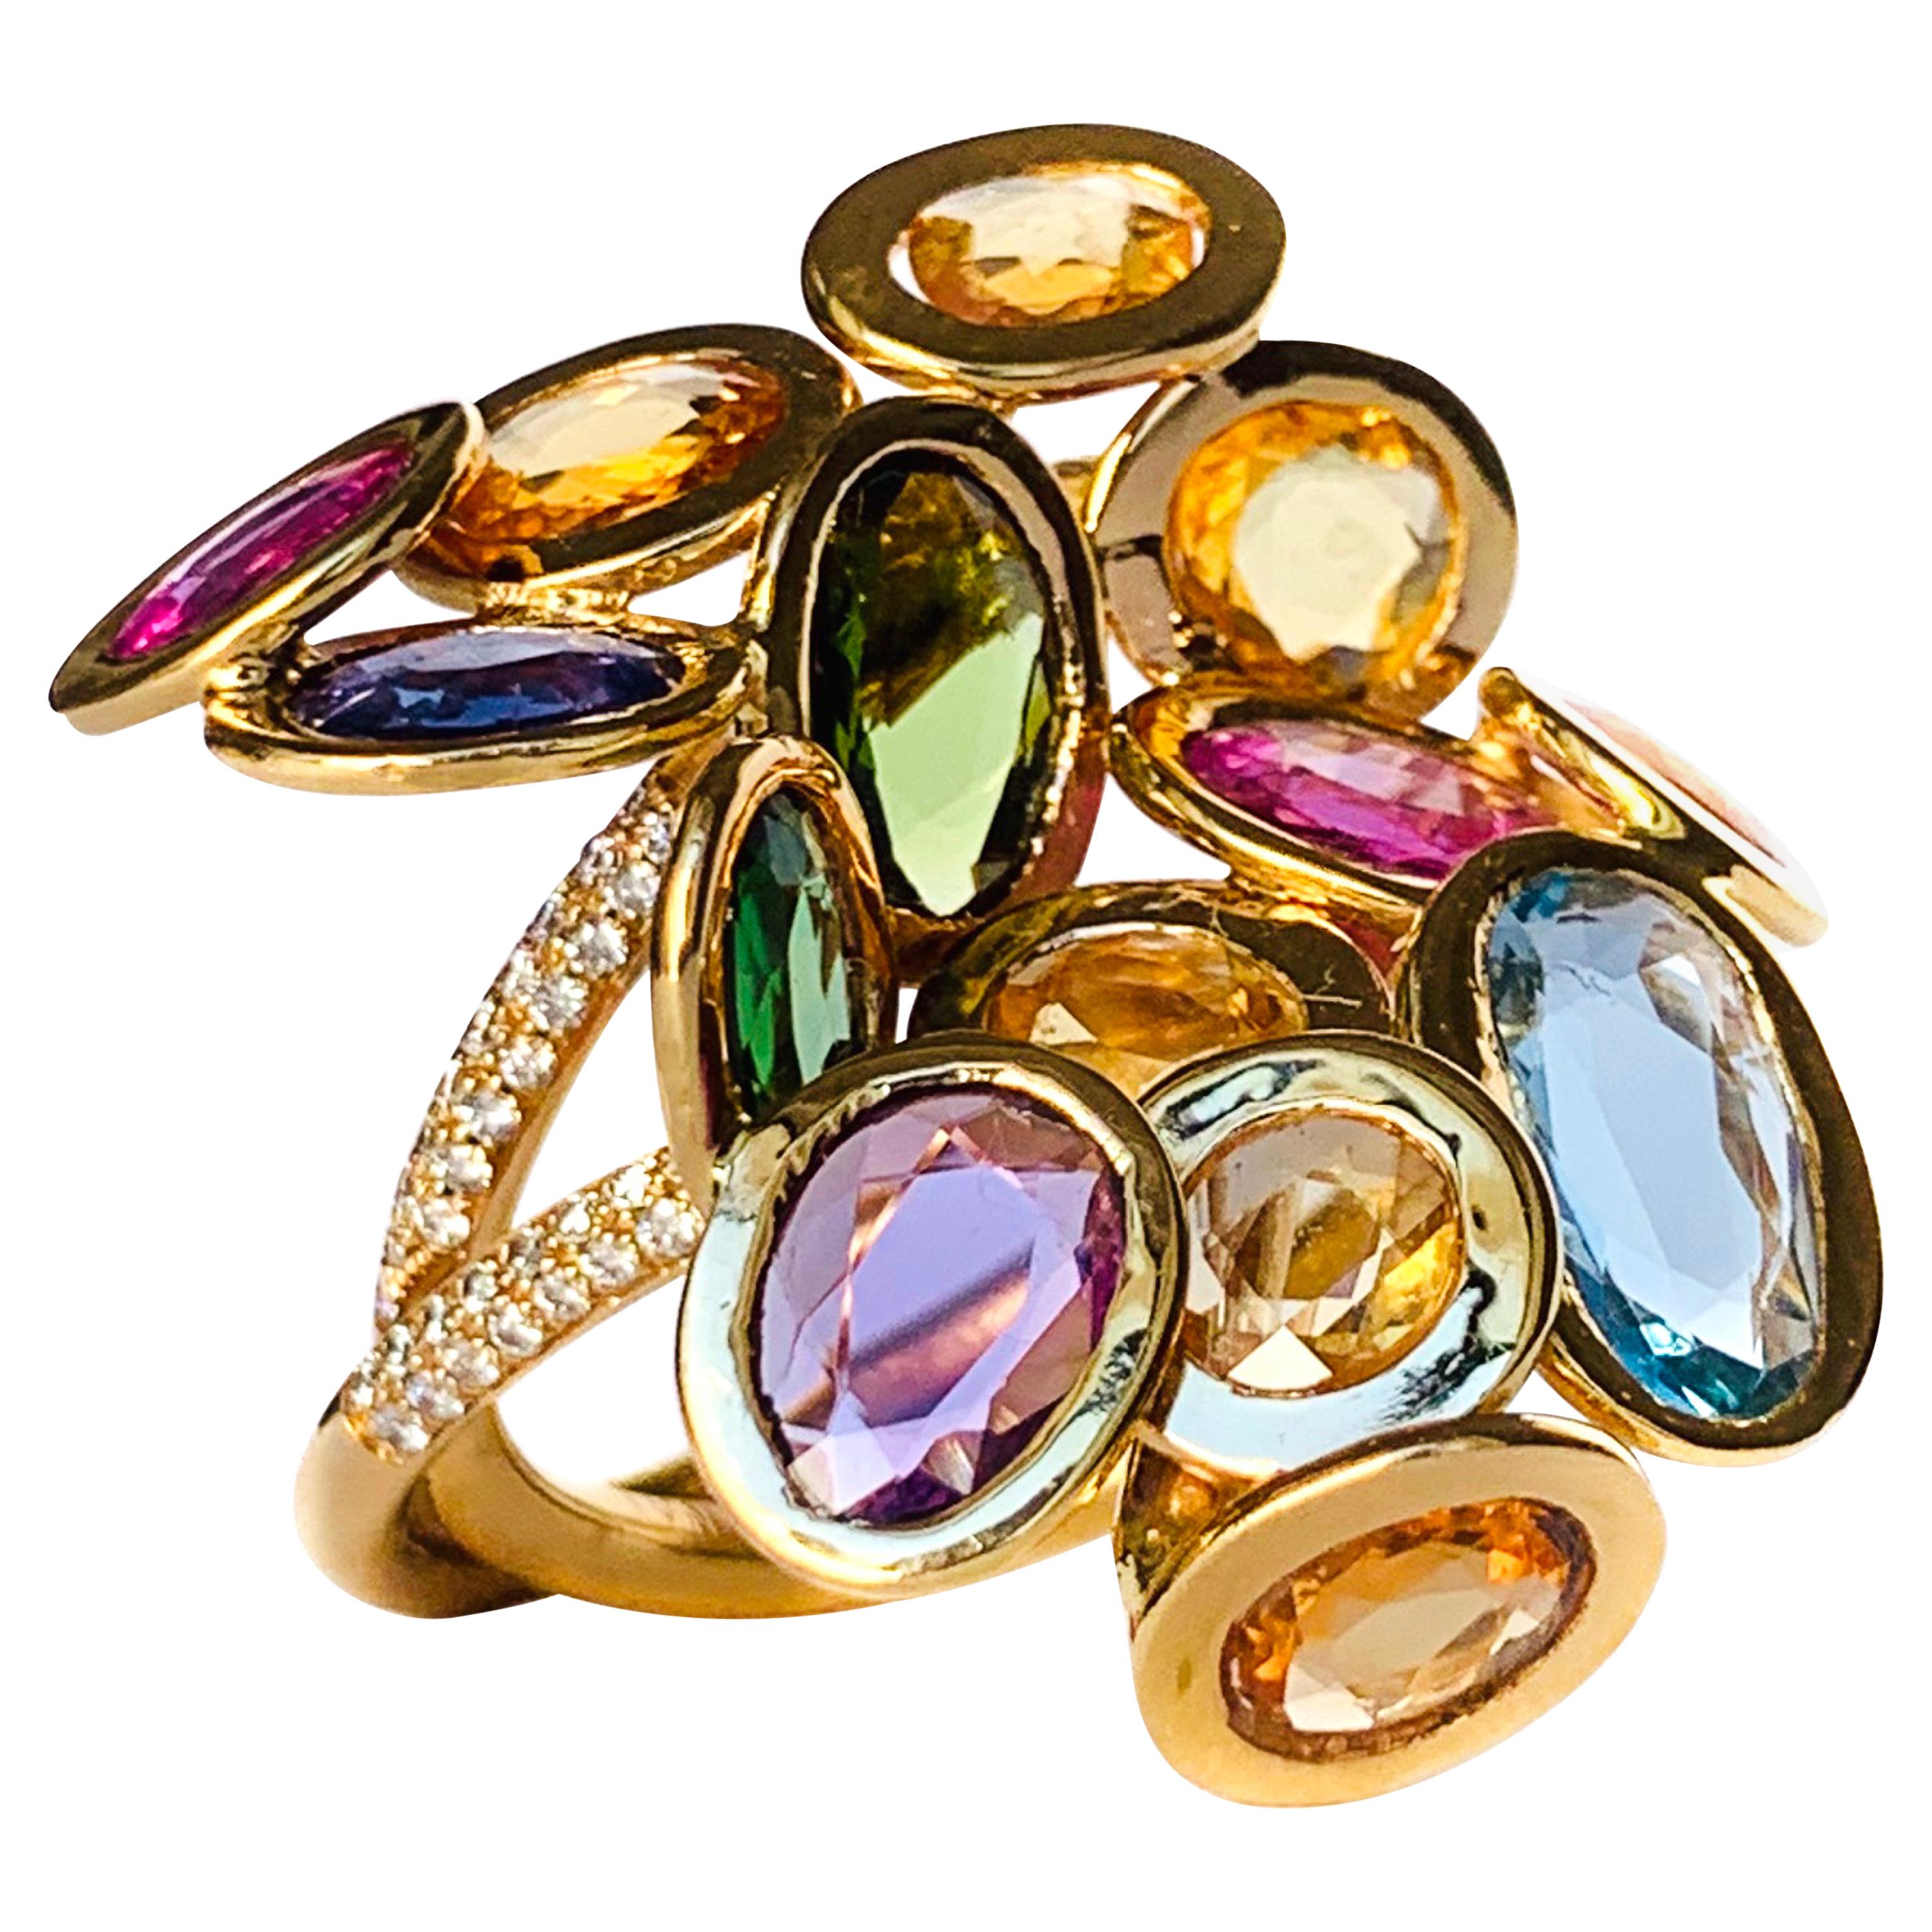 19.2 Karat Yellow Gold and Rose Cut Sapphire Contemporary Ring